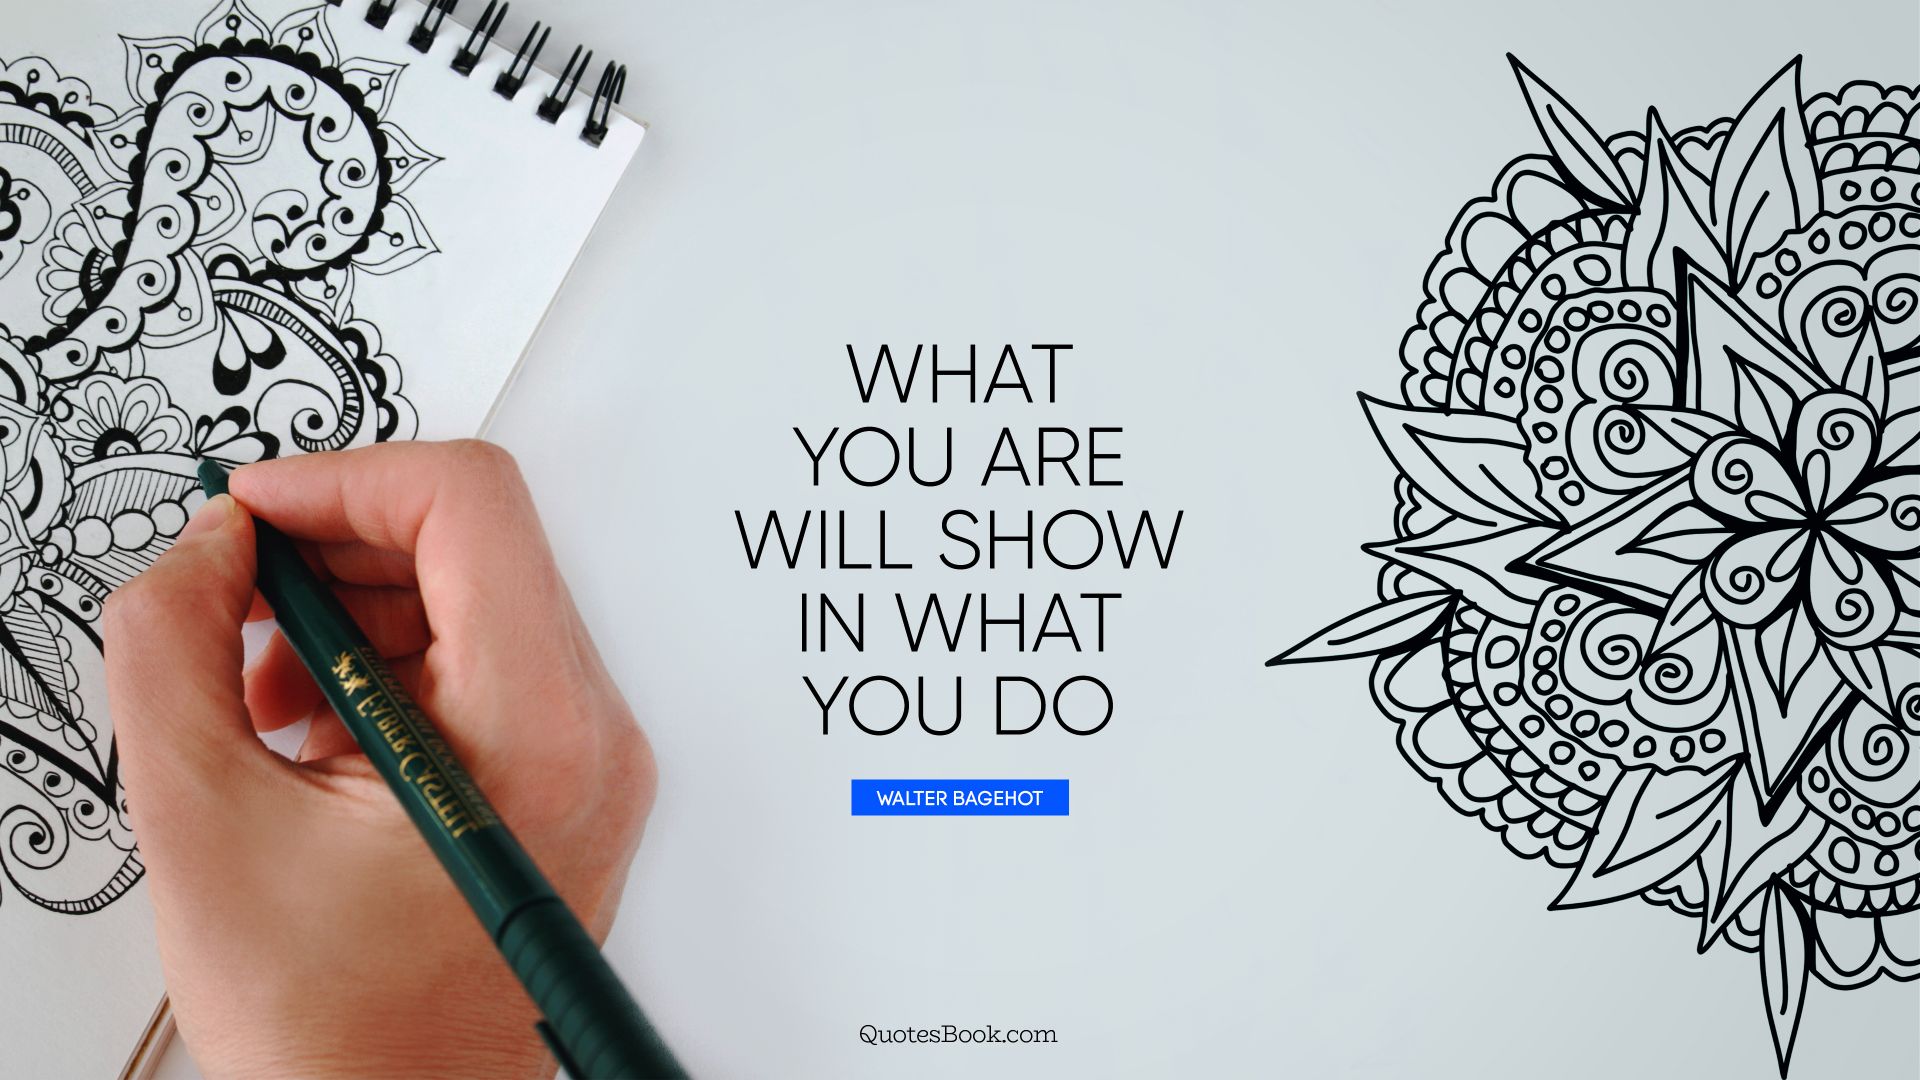 What you are will show in what you do. - Quote by Thomas A. Edison